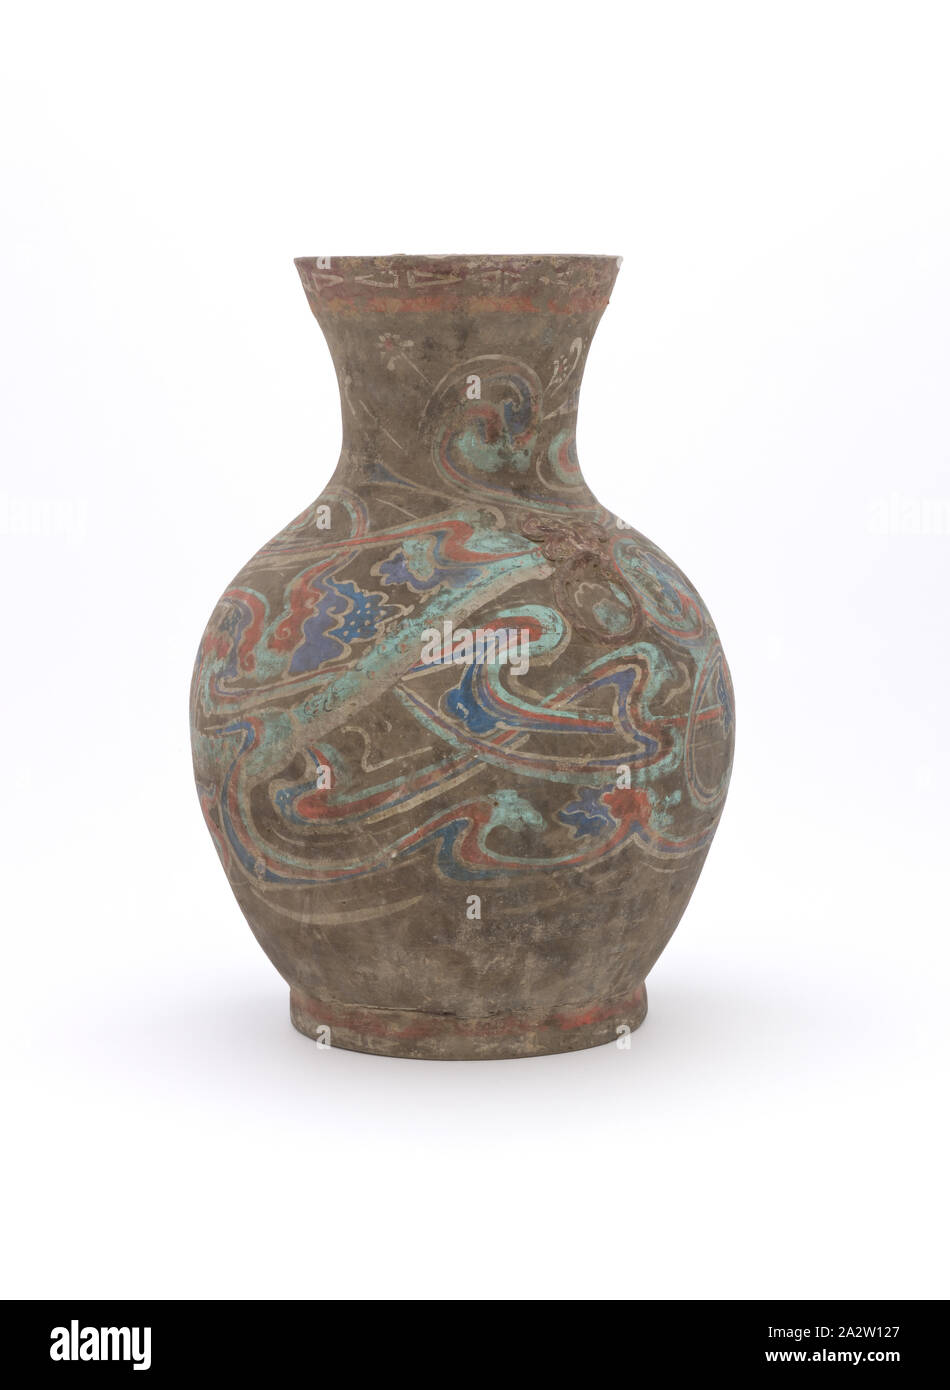 jar with painted dragon design, Unknown, ?, earthenware, Pigments, H: 16-3/8 in., Asian Art Stock Photo